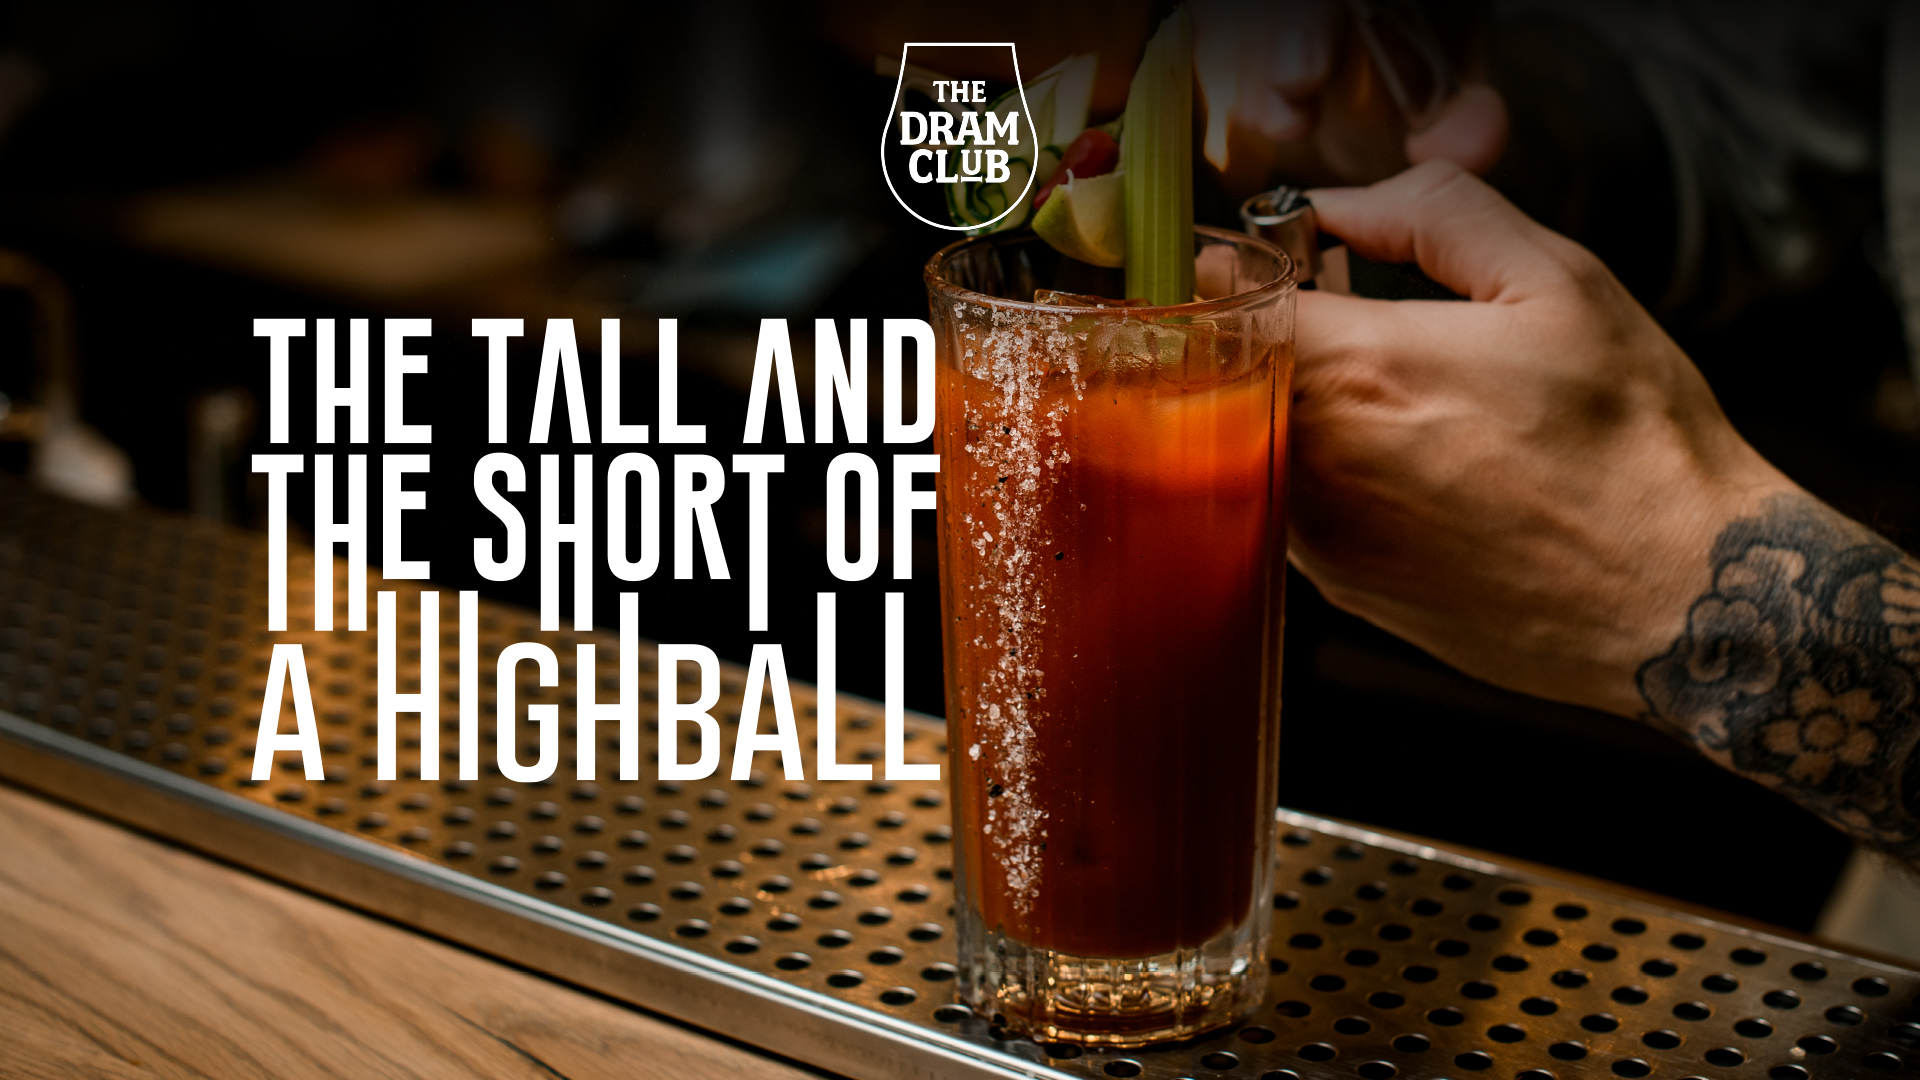 The tall and the short of a Highball